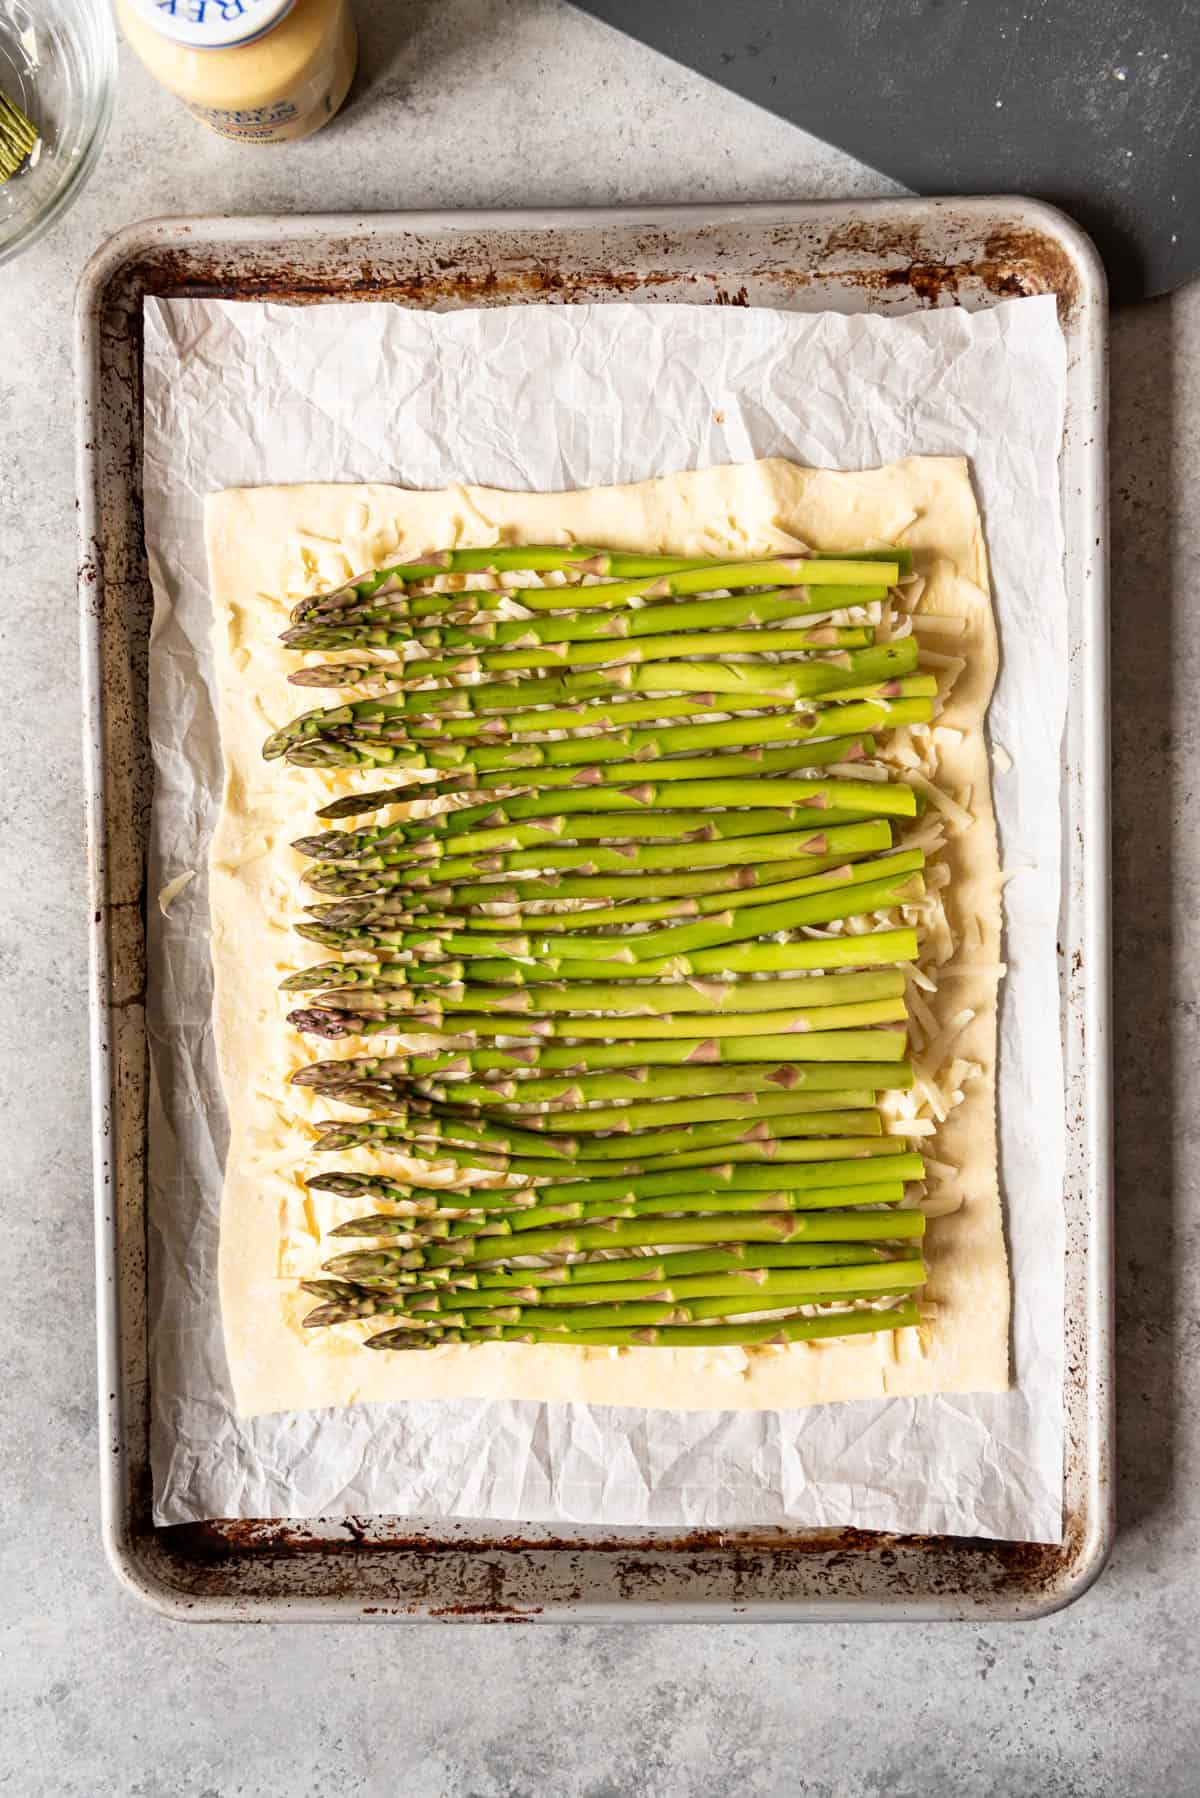 An overhead image of asparagus stalks on top of puff pastry.